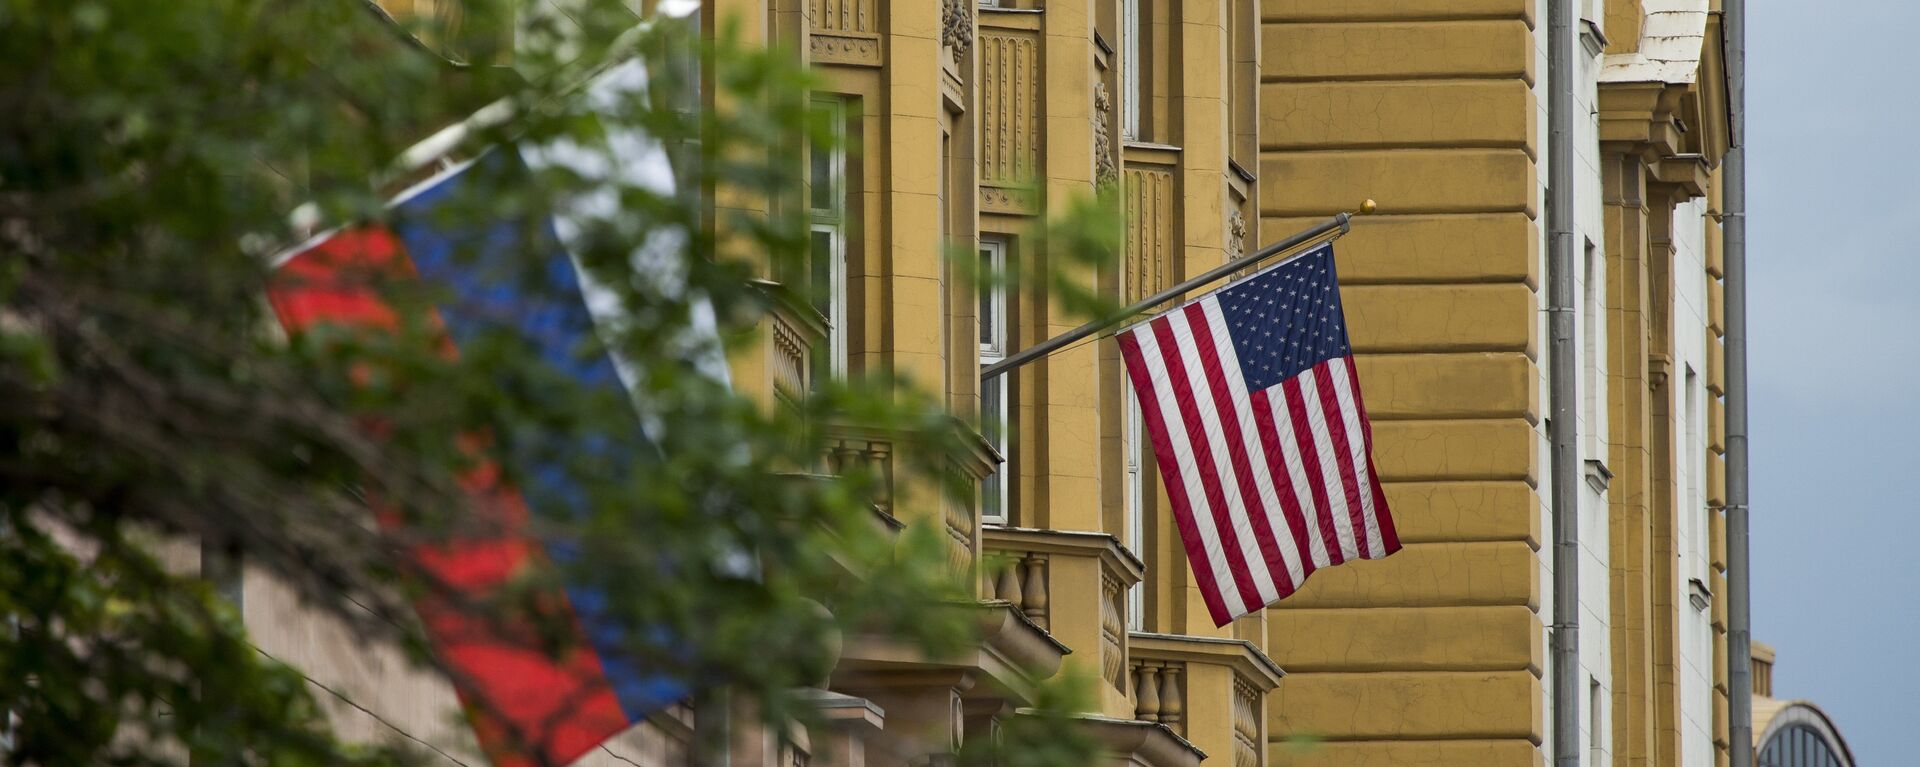 U.S. and Russian flags hung at the U.S. Embassy in Moscow, Russia, Friday, July 28, 2017 - Sputnik International, 1920, 30.04.2021